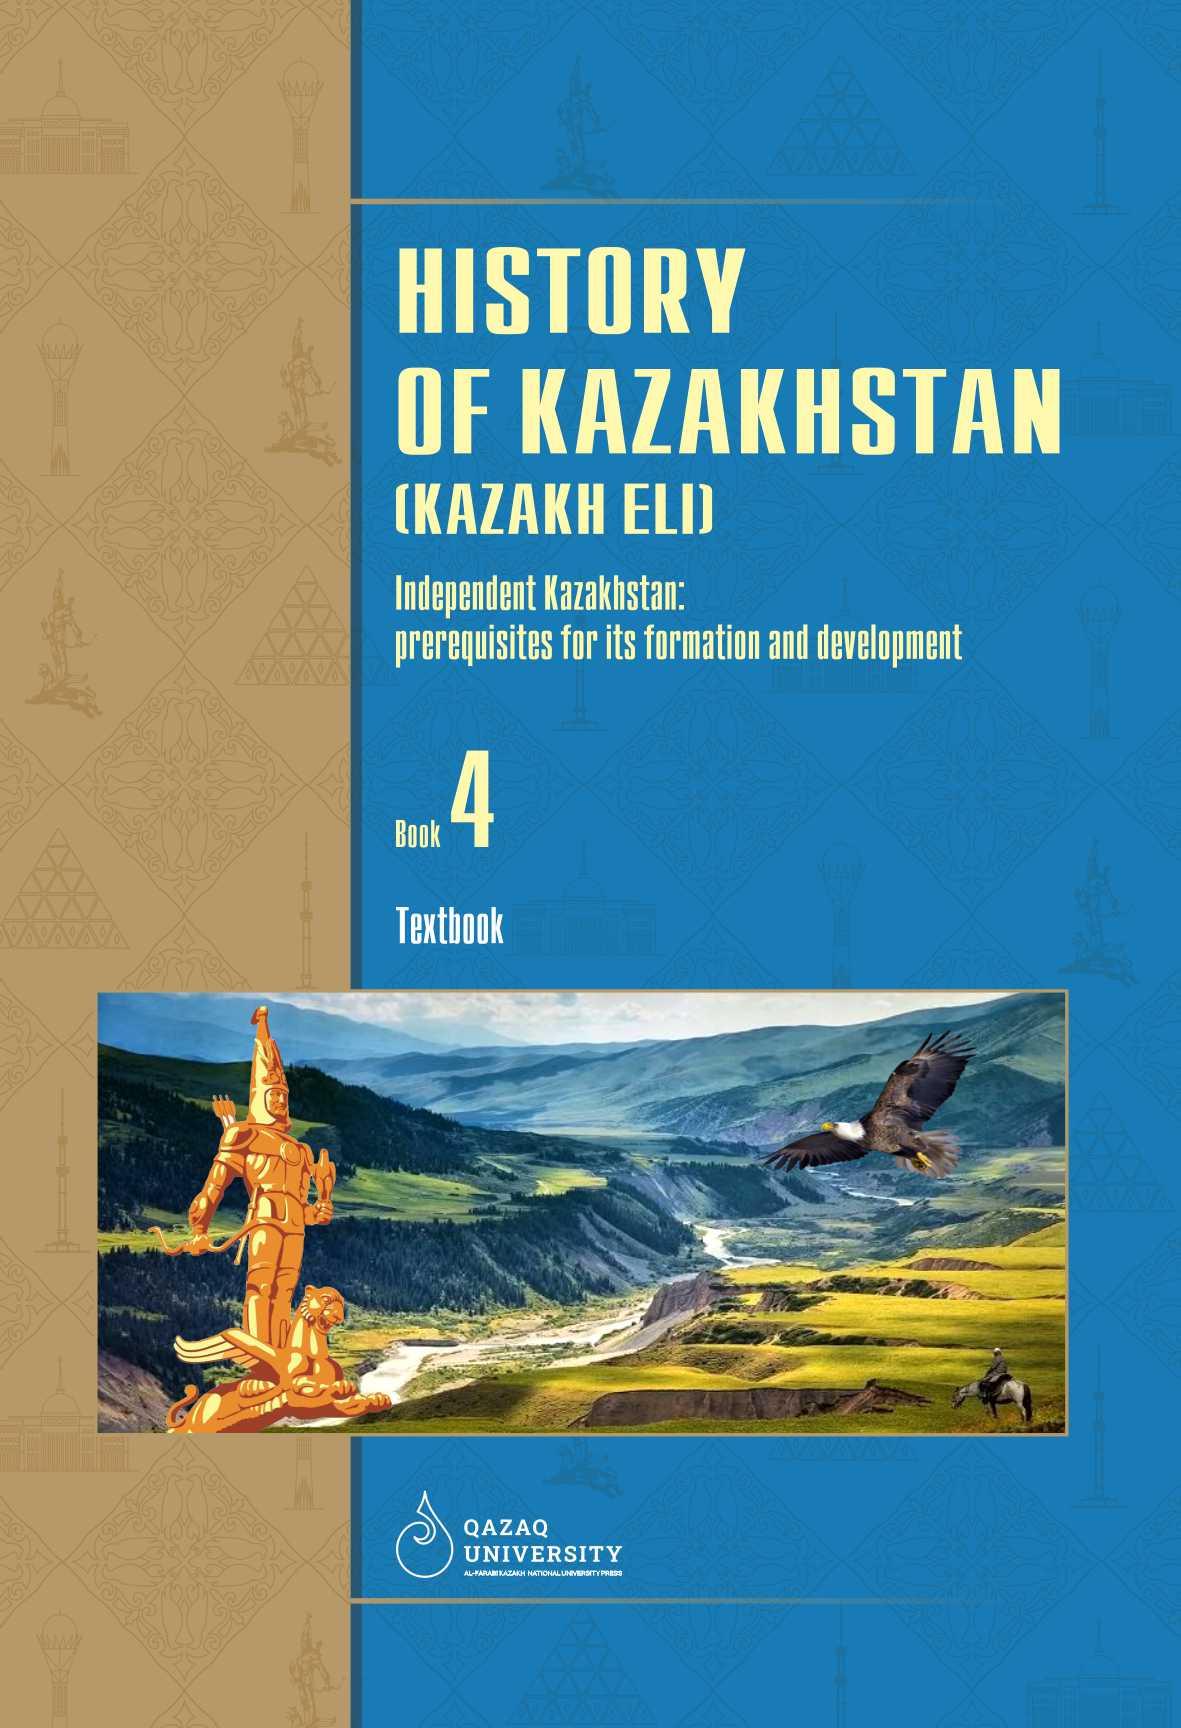 History of Kazakhstan (Kazakh Eli): A 4-volume textbook. Book 4: Independent Kazakhstan: Prerequisites for its formation and development – 210 p.